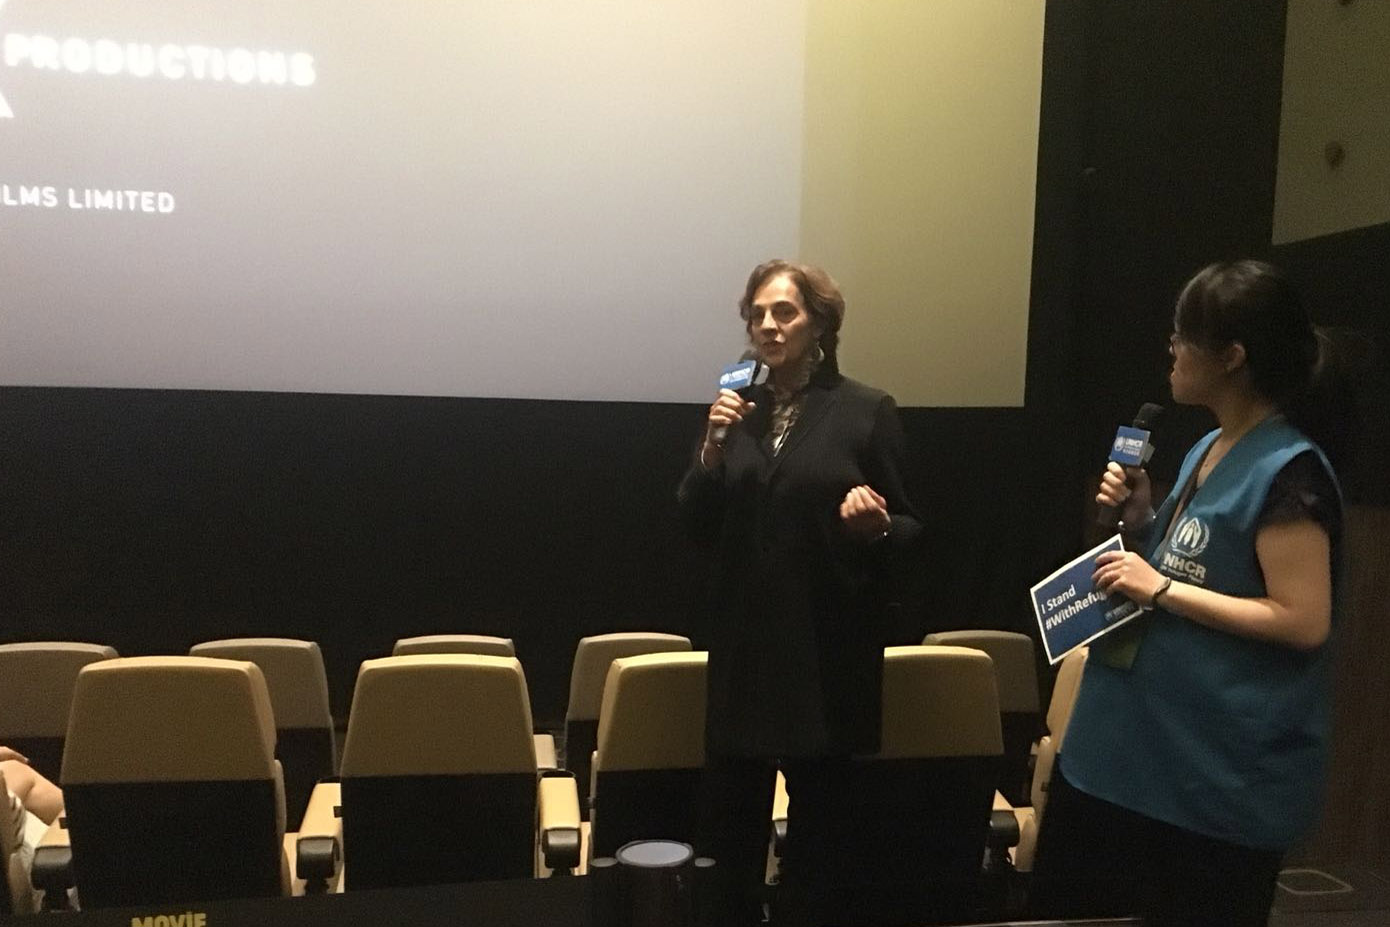 Director Ros Horin shared behind-the-scenes stories at the Q&A session after the closing screening. 